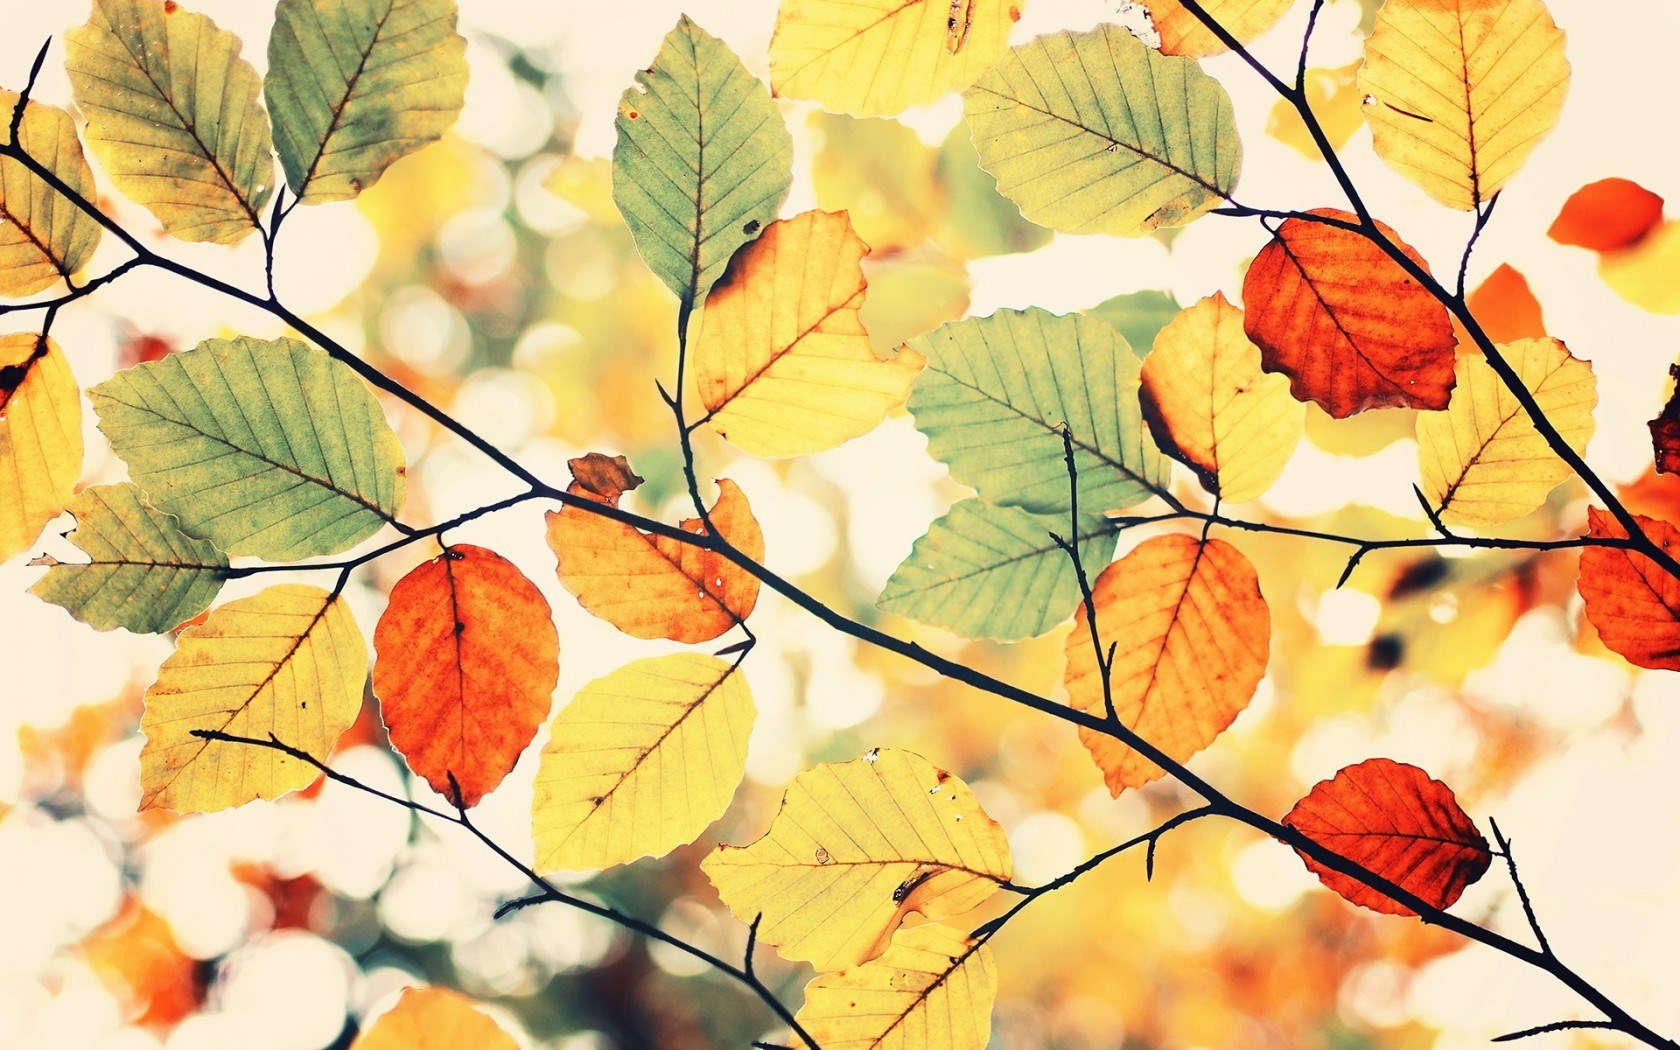 Colorful Autumn Leaves Nature wallpaper | 1680x1050 | #29724